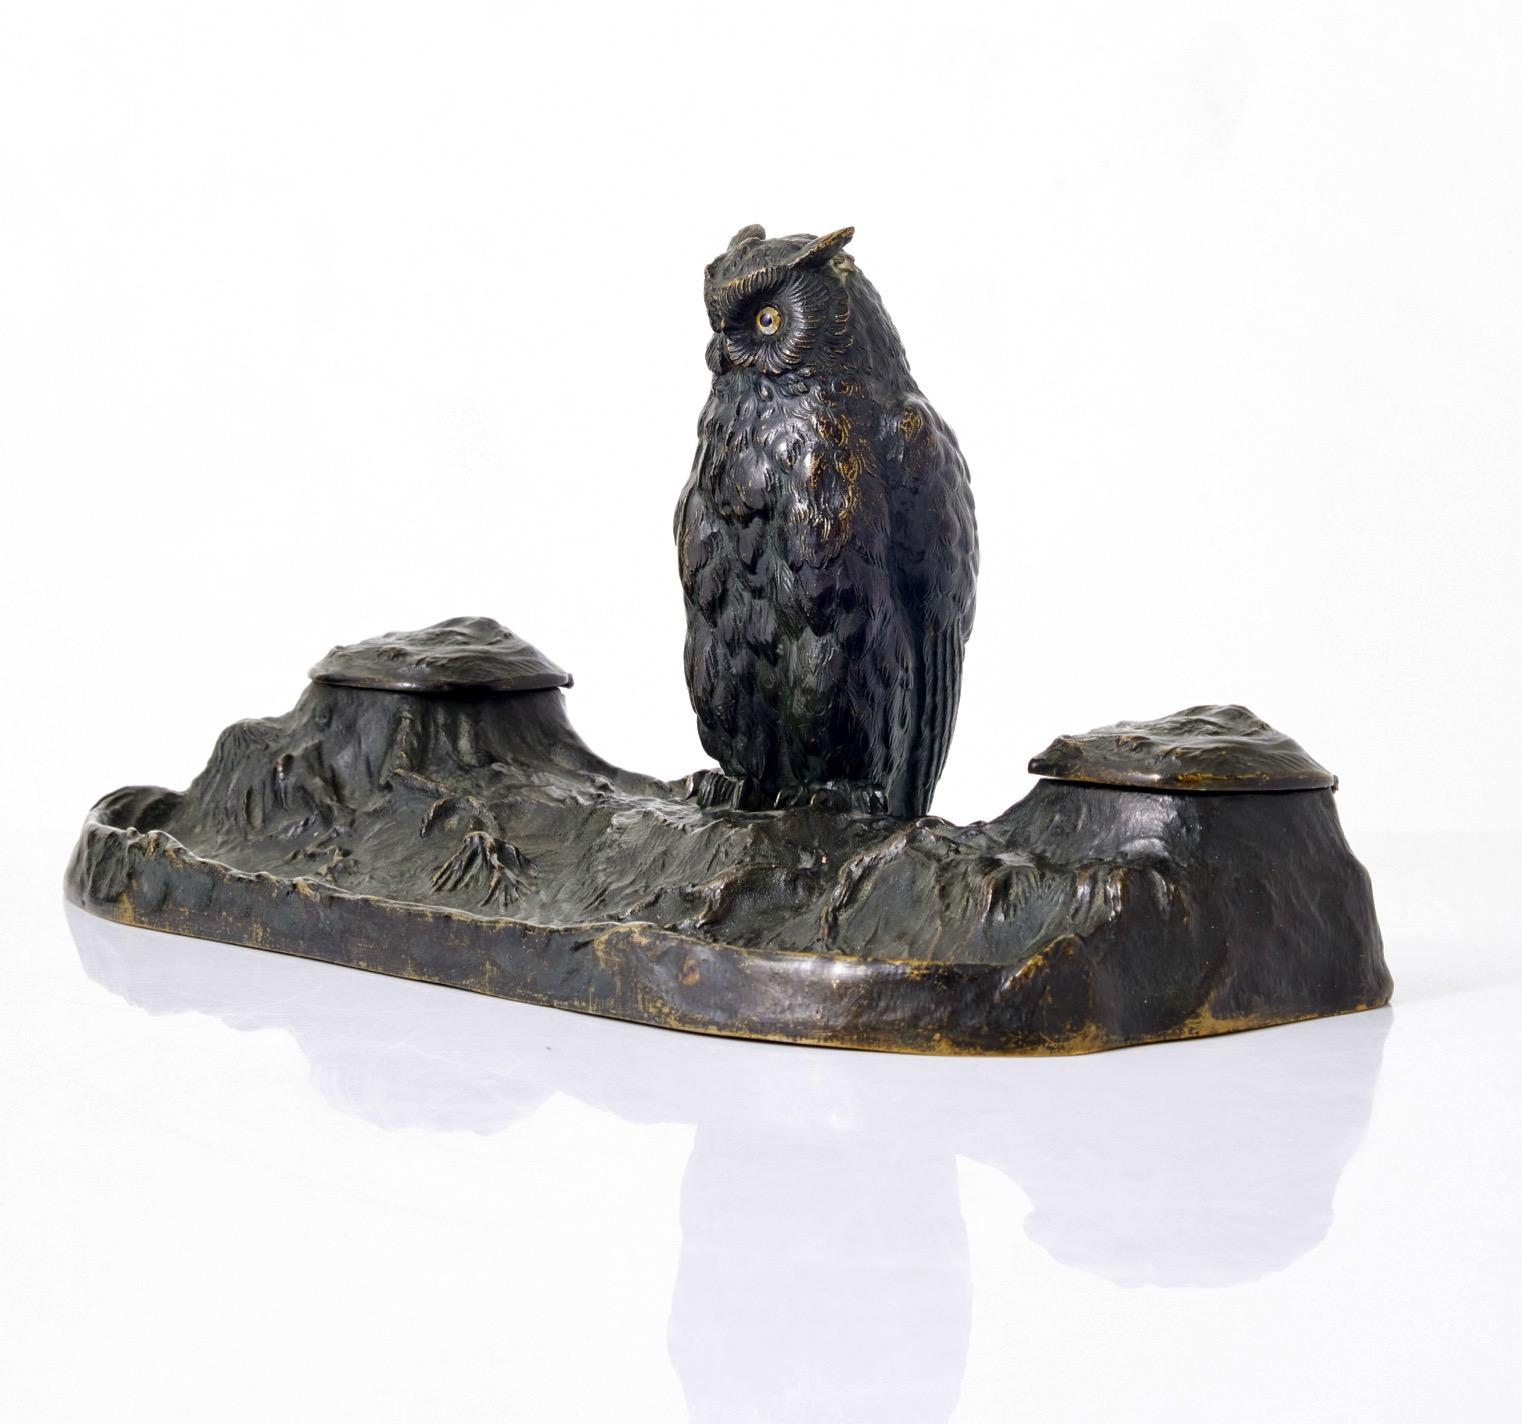 An Art Noveau or Jugend patinated bronze pen and inkwell with an owl sitting in the center. The owl have inset glass eyes. Made ca.1900. Possibly Swedish. 
Symbolism of the owl: The modern West generally associates owls with wisdom and vigilance.